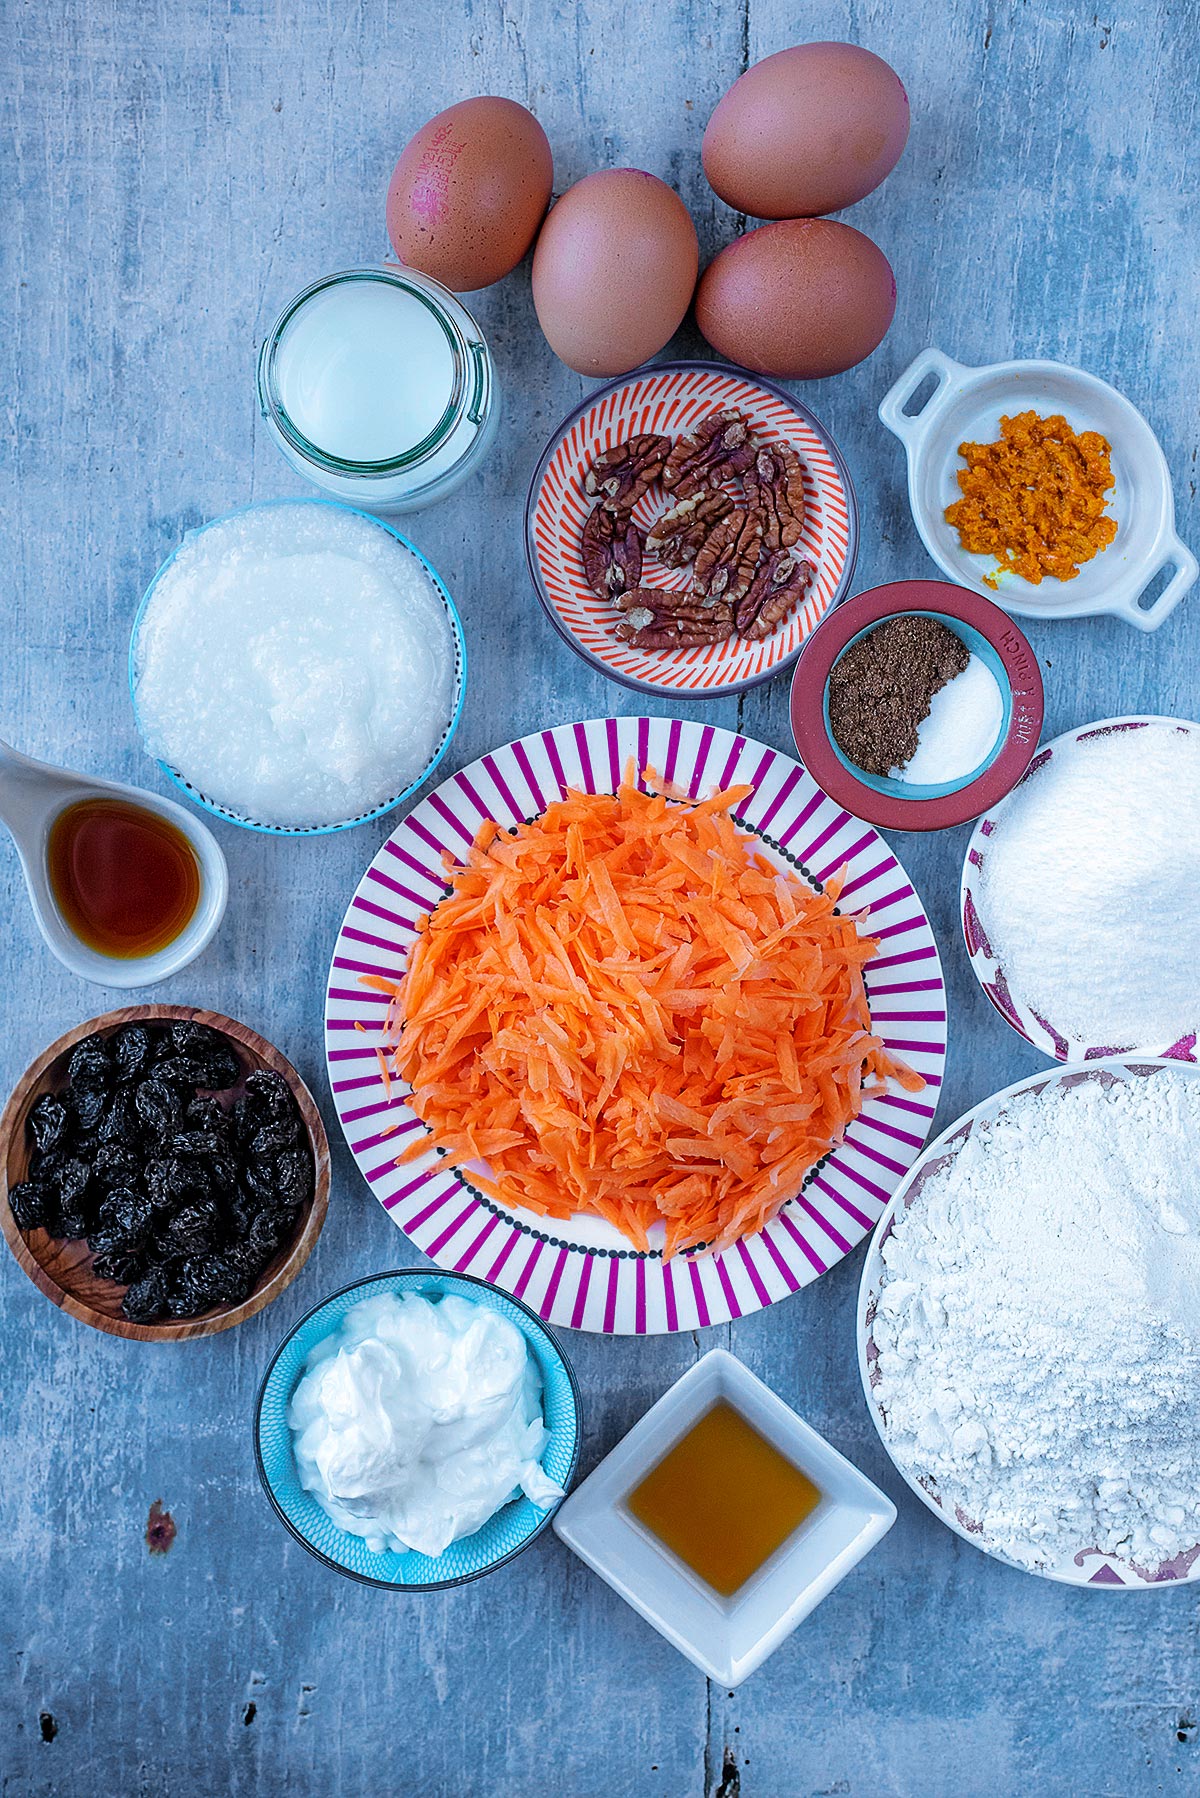 A plate of grated carrot surrounded by flour, sweetener, yogurt, raisins, nuts, spices, eggs, milk and orange zest